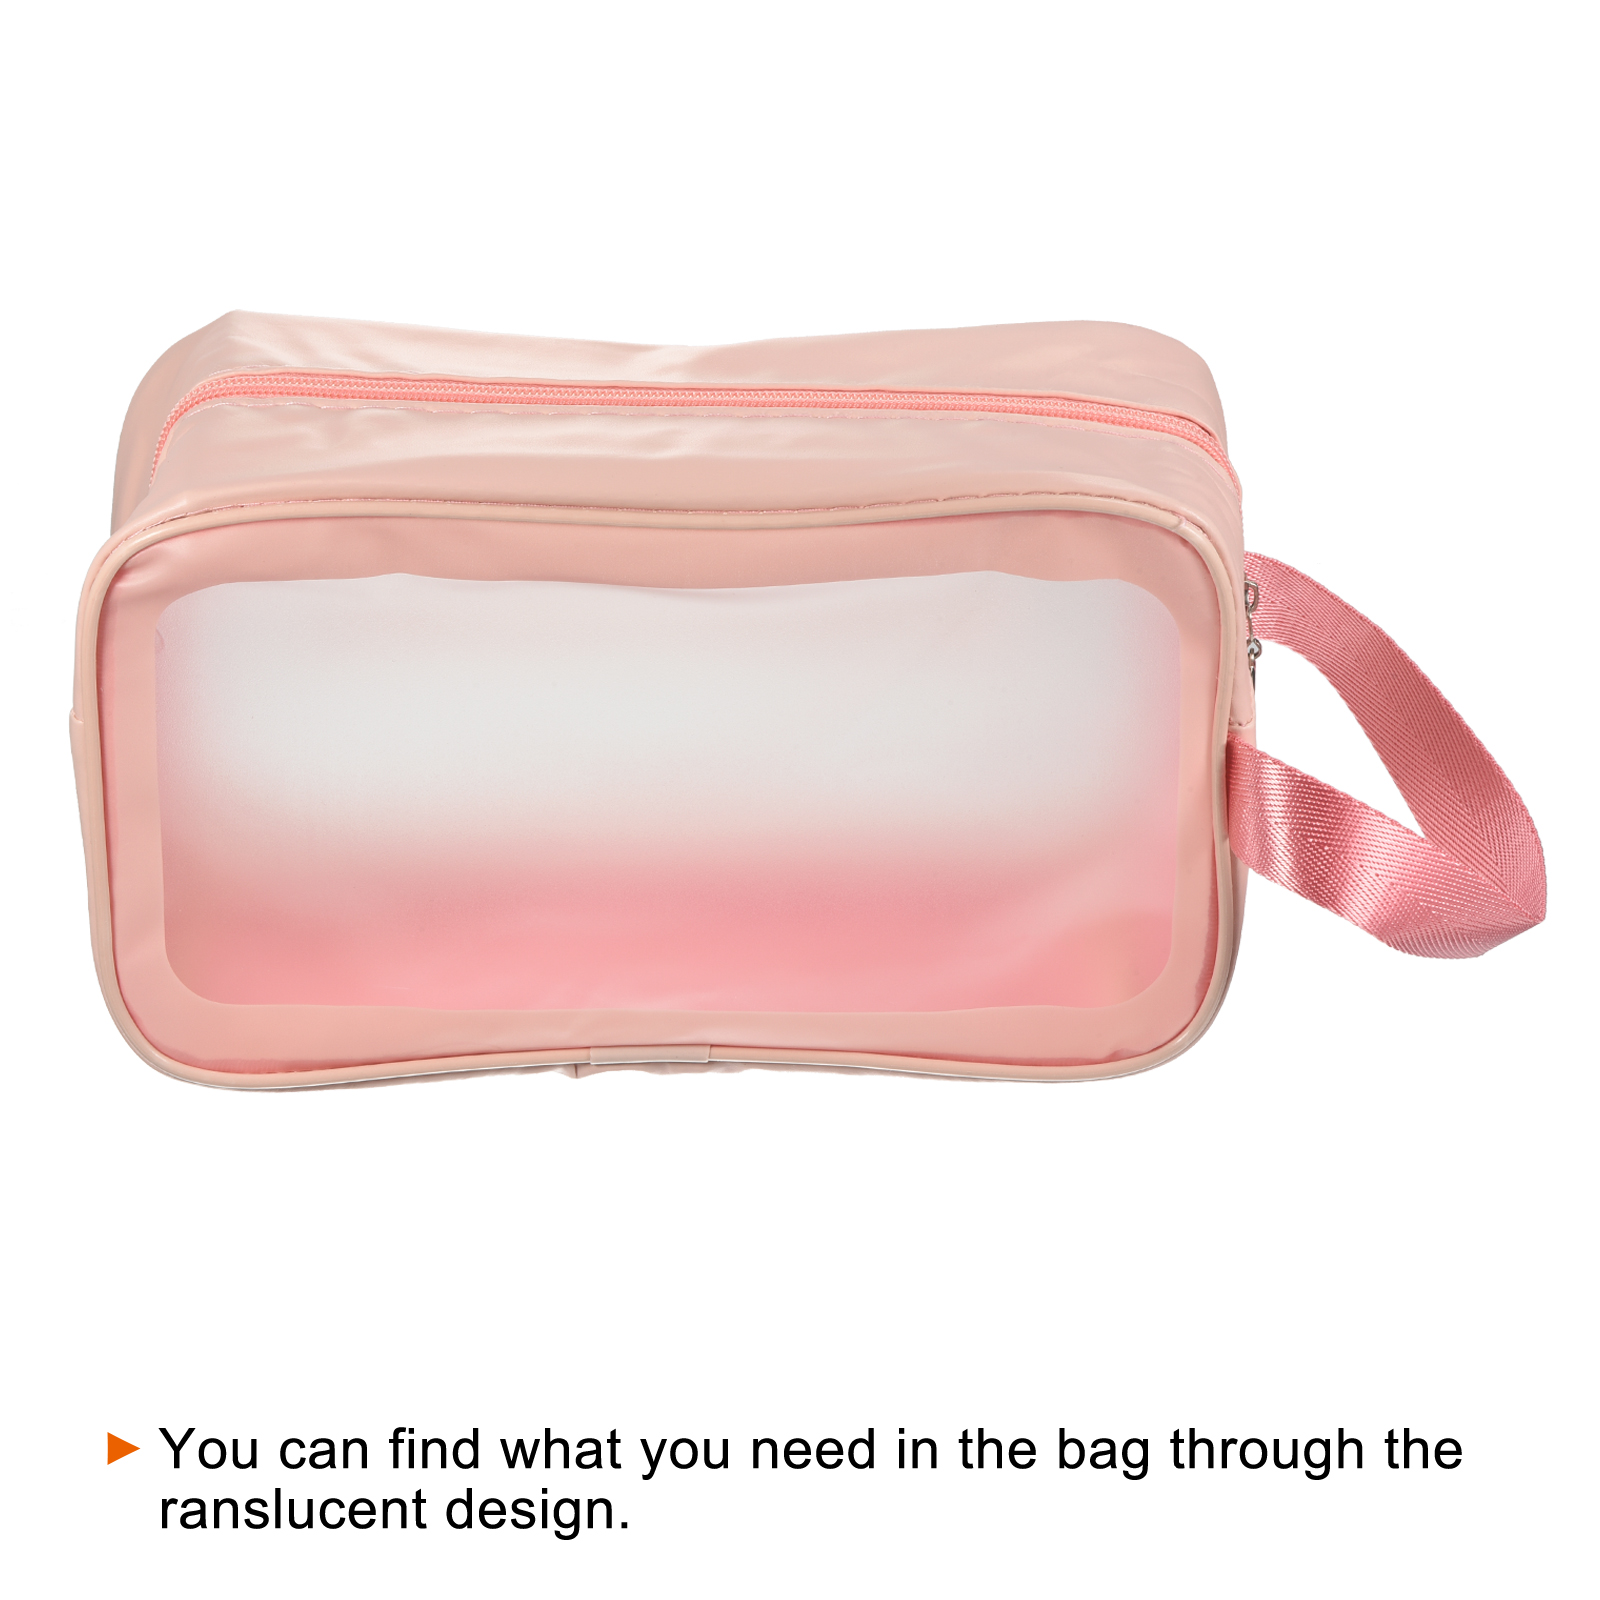 Uxcell 5.9"x9.8"x3.7" PVC Clear Toiletry Bag Makeup Bags with Zipper Handle Pink 3 Pack - image 3 of 5